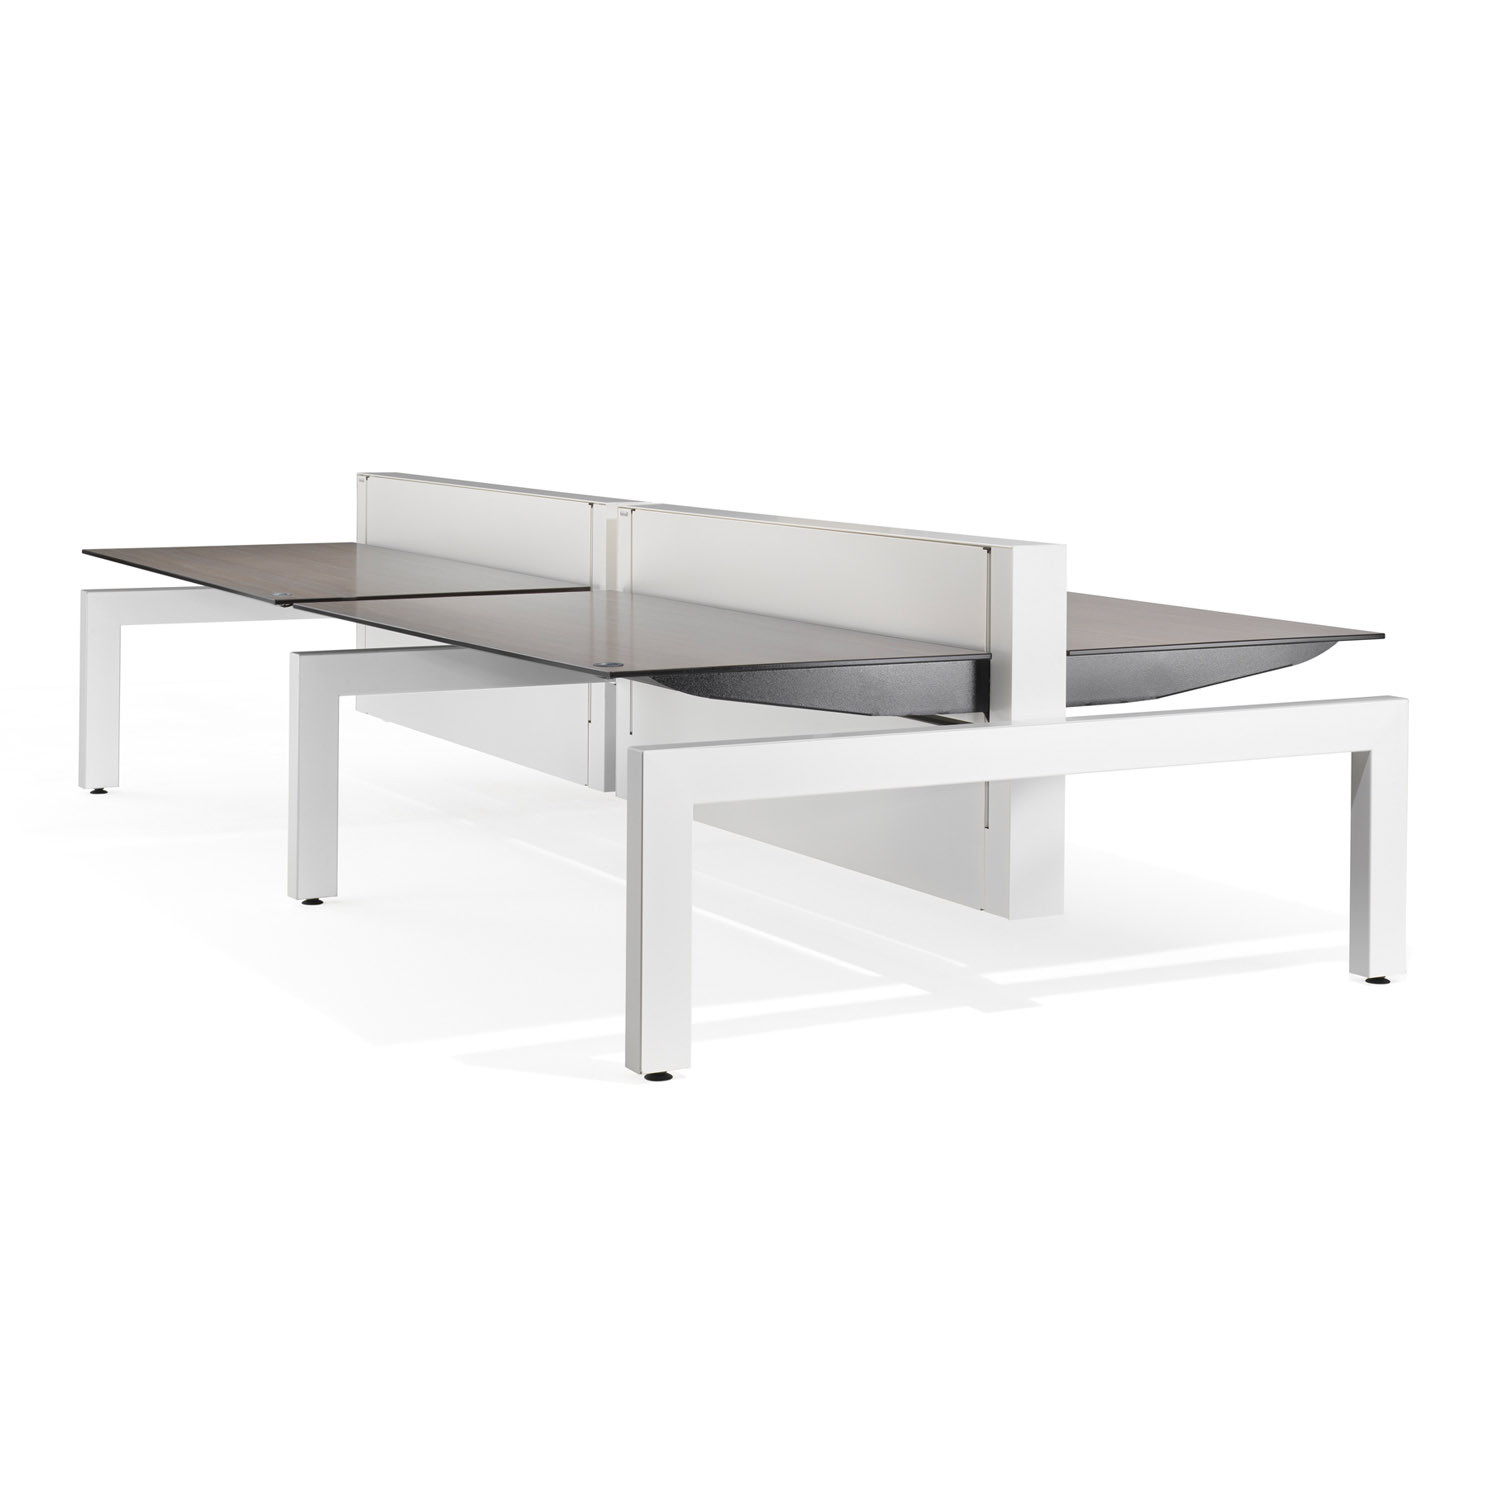 Ahrend 750 Bench System